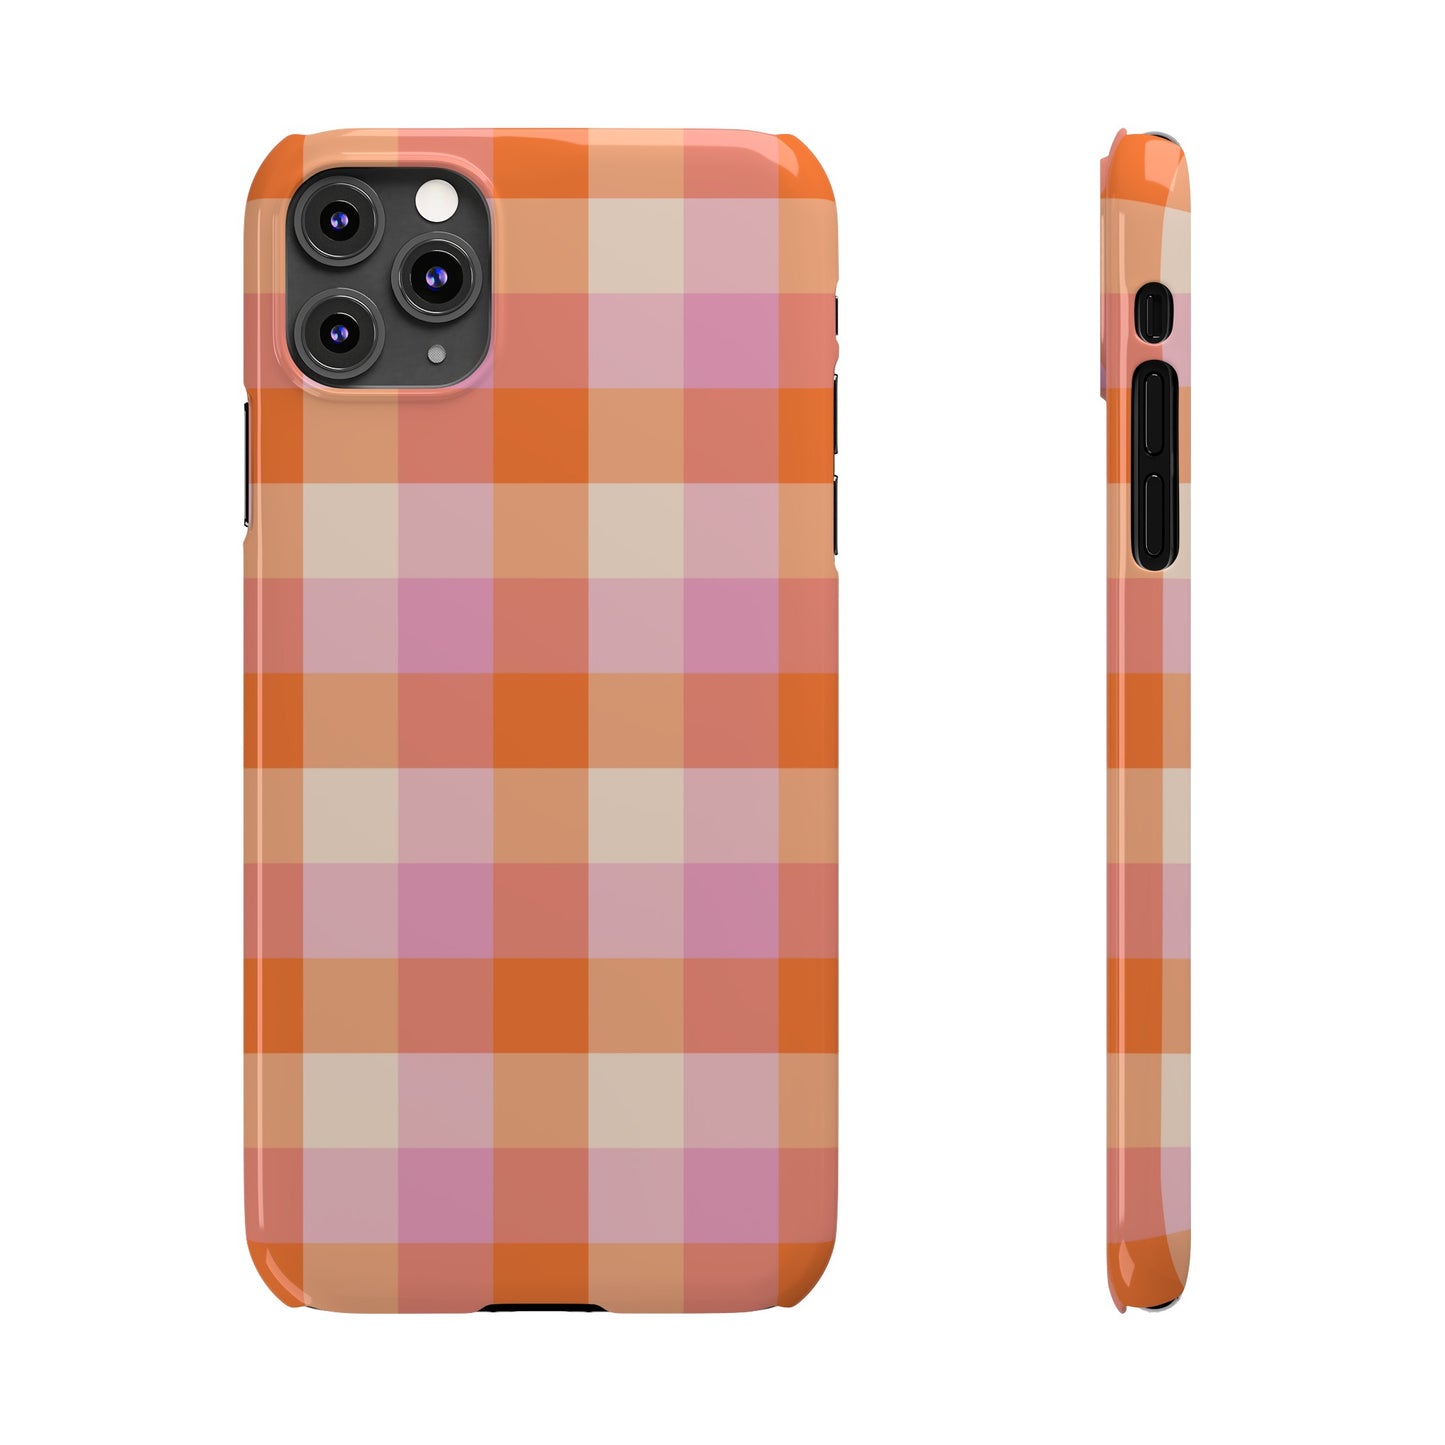 Sunset Kiss Iphone Case